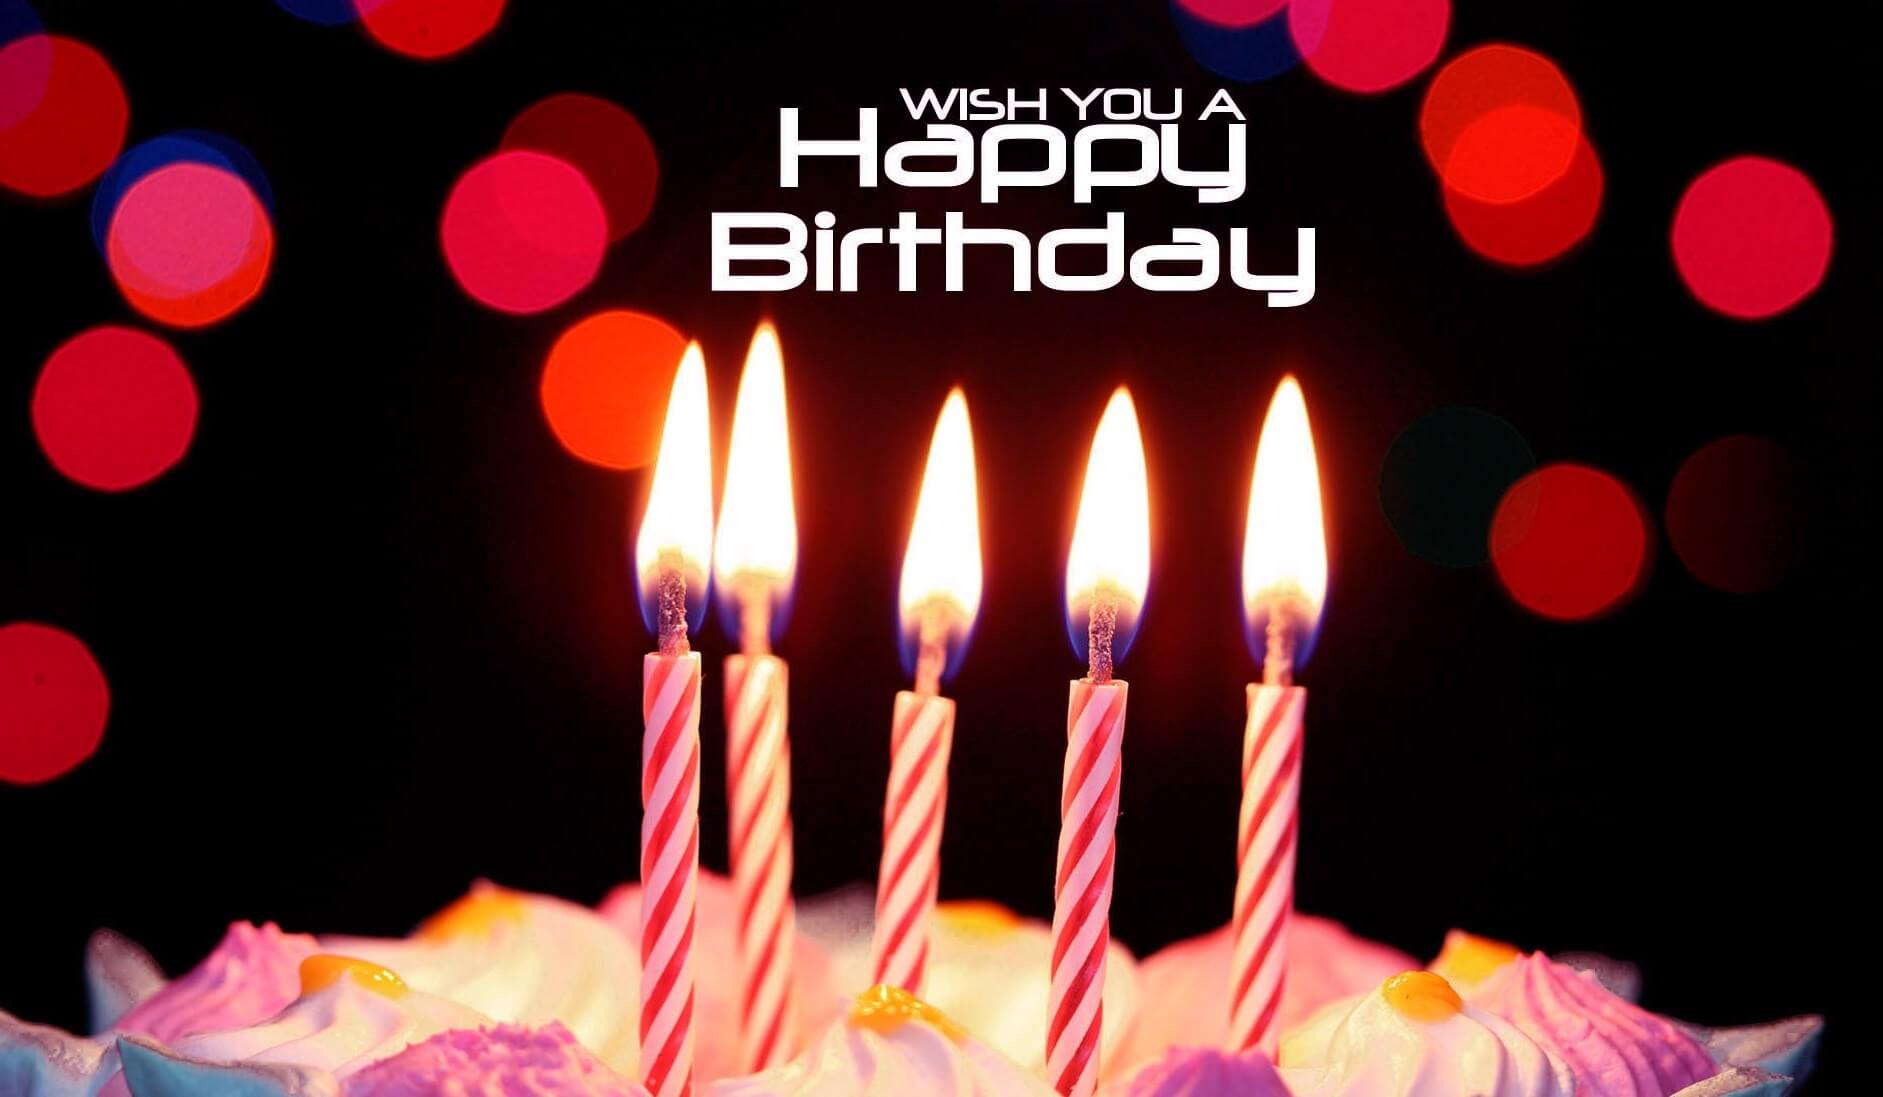 The Best Happy Birthday Wishes
 Happy Birthday Messages and Wishes